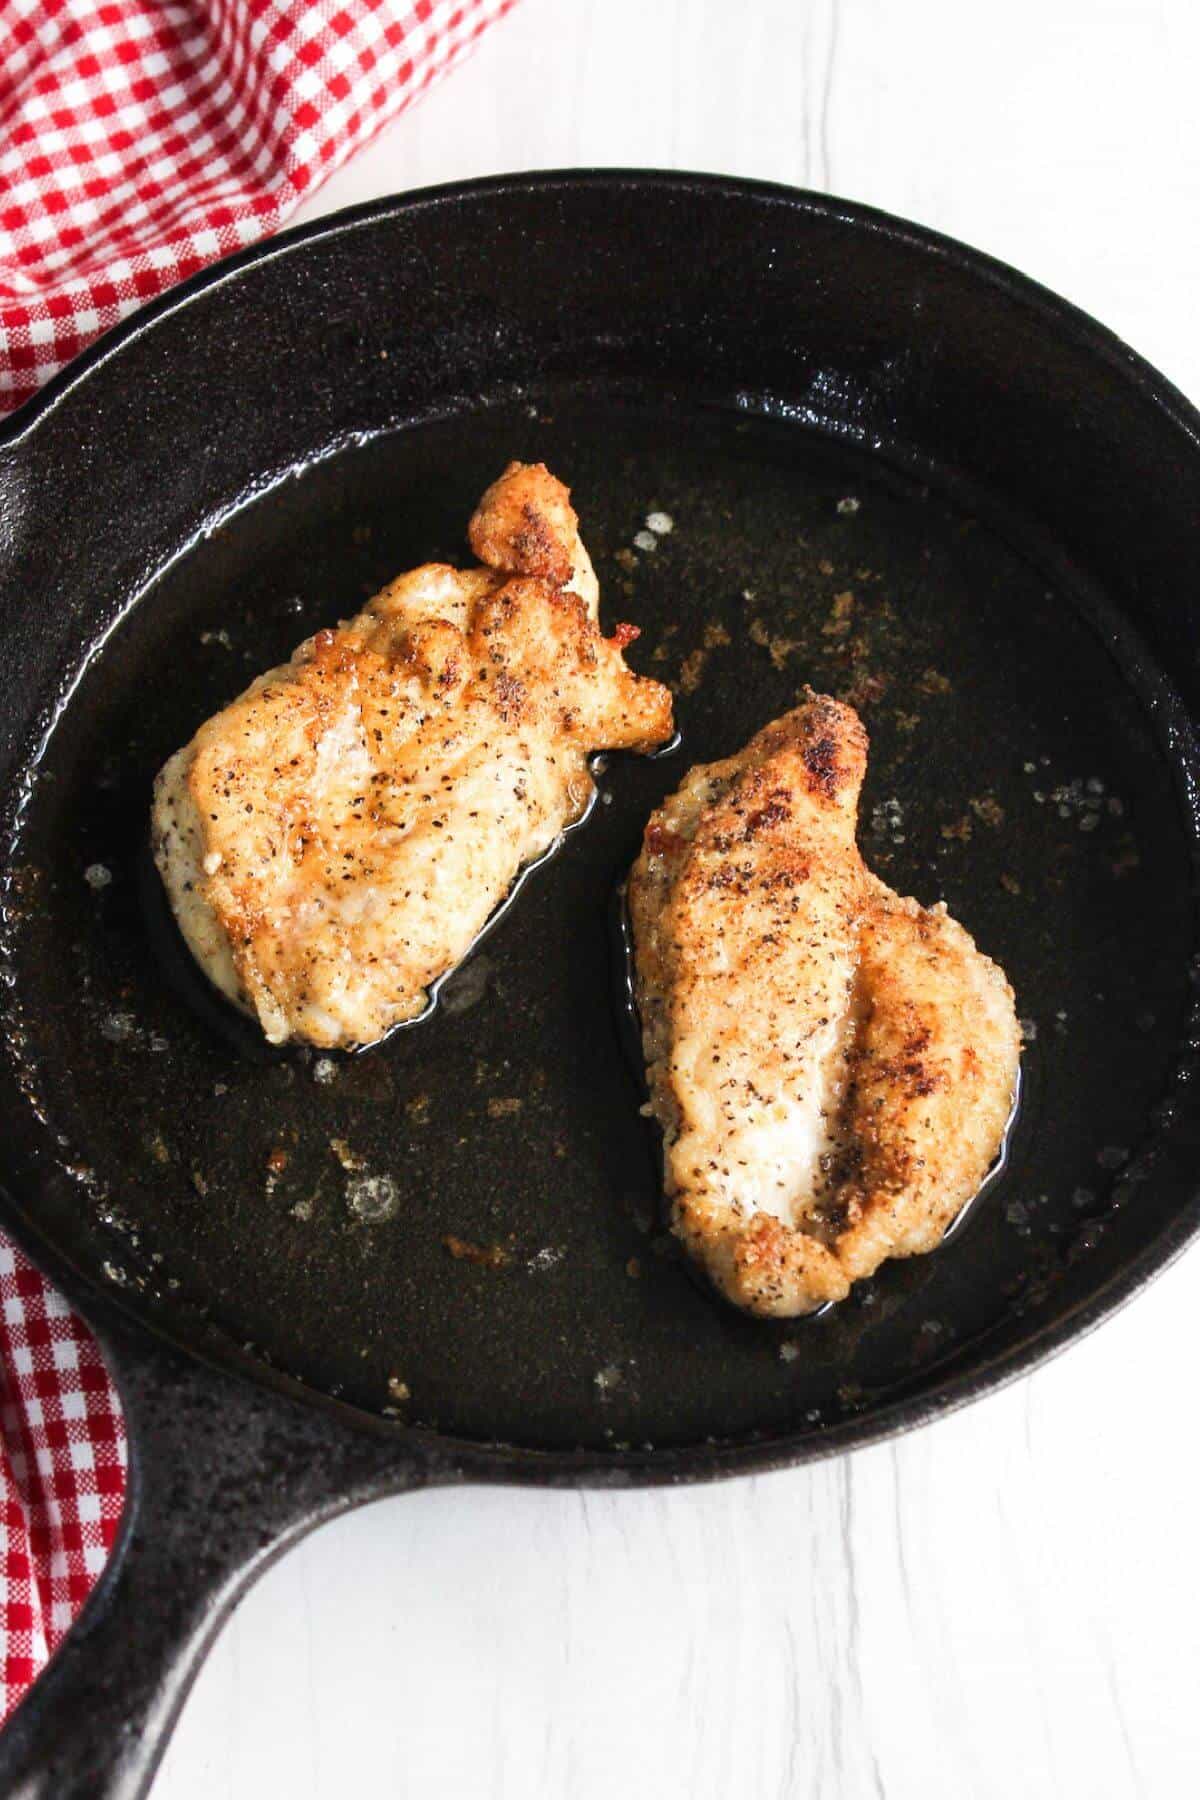 Two fried chicken breasts in a cast iron skillet.